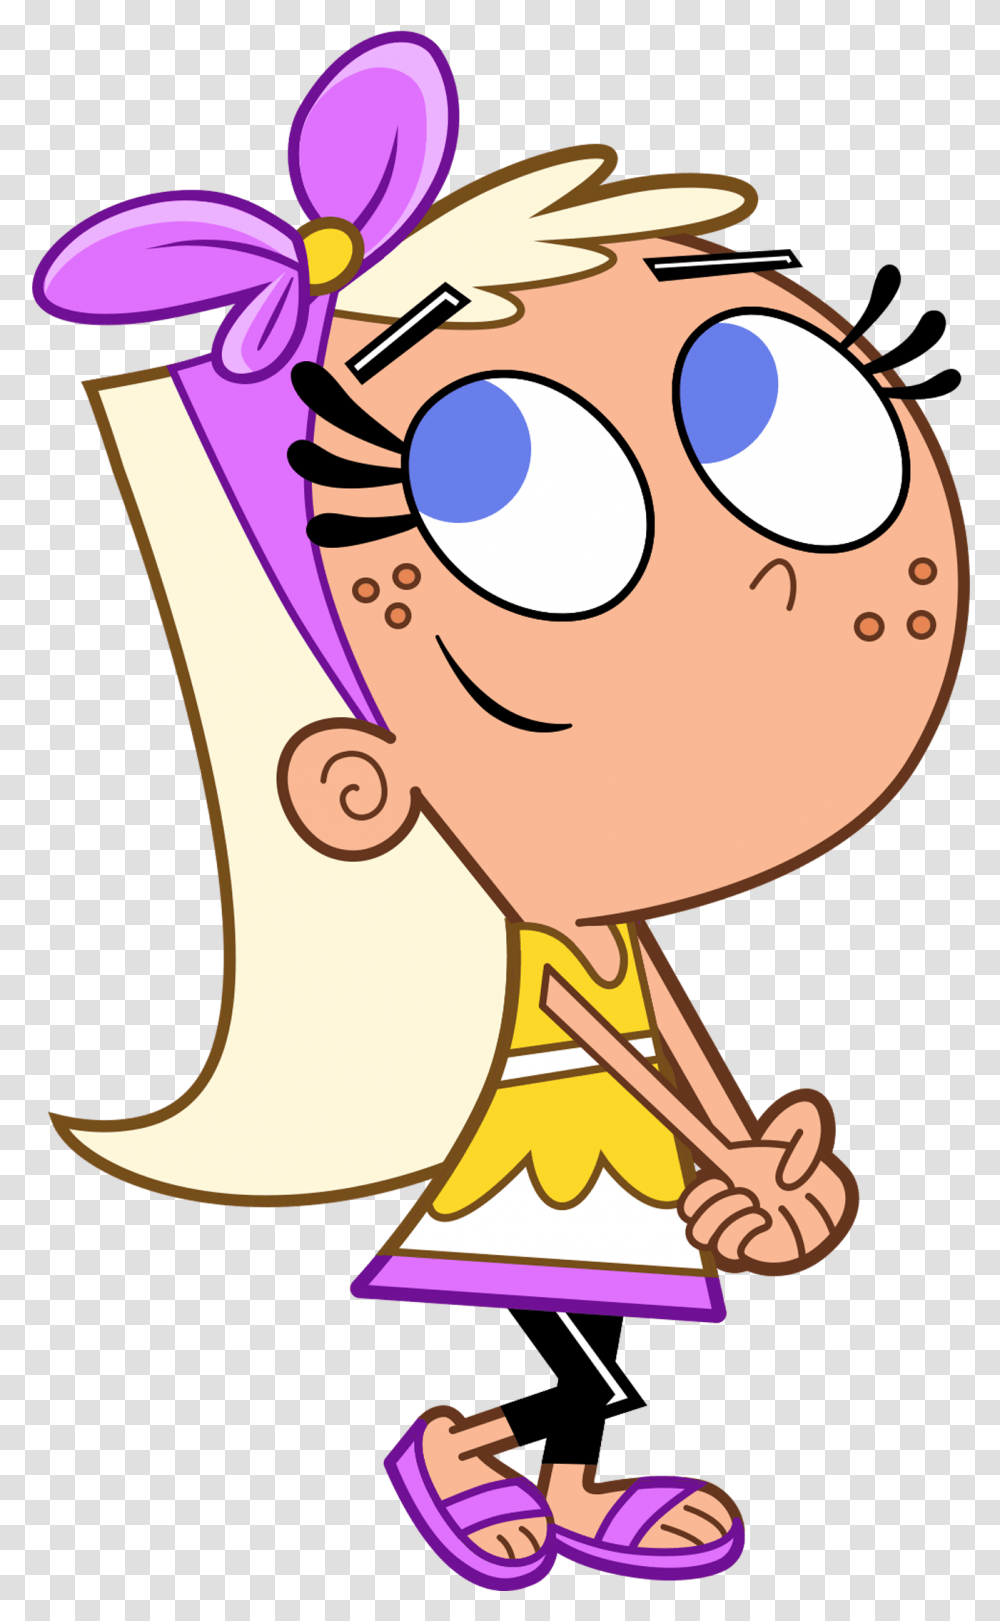 The Fairly Oddparents Character Chloe Daydreaming Cosmo Und Wanda Chloe, Label, Sticker, Christmas Stocking Transparent Png